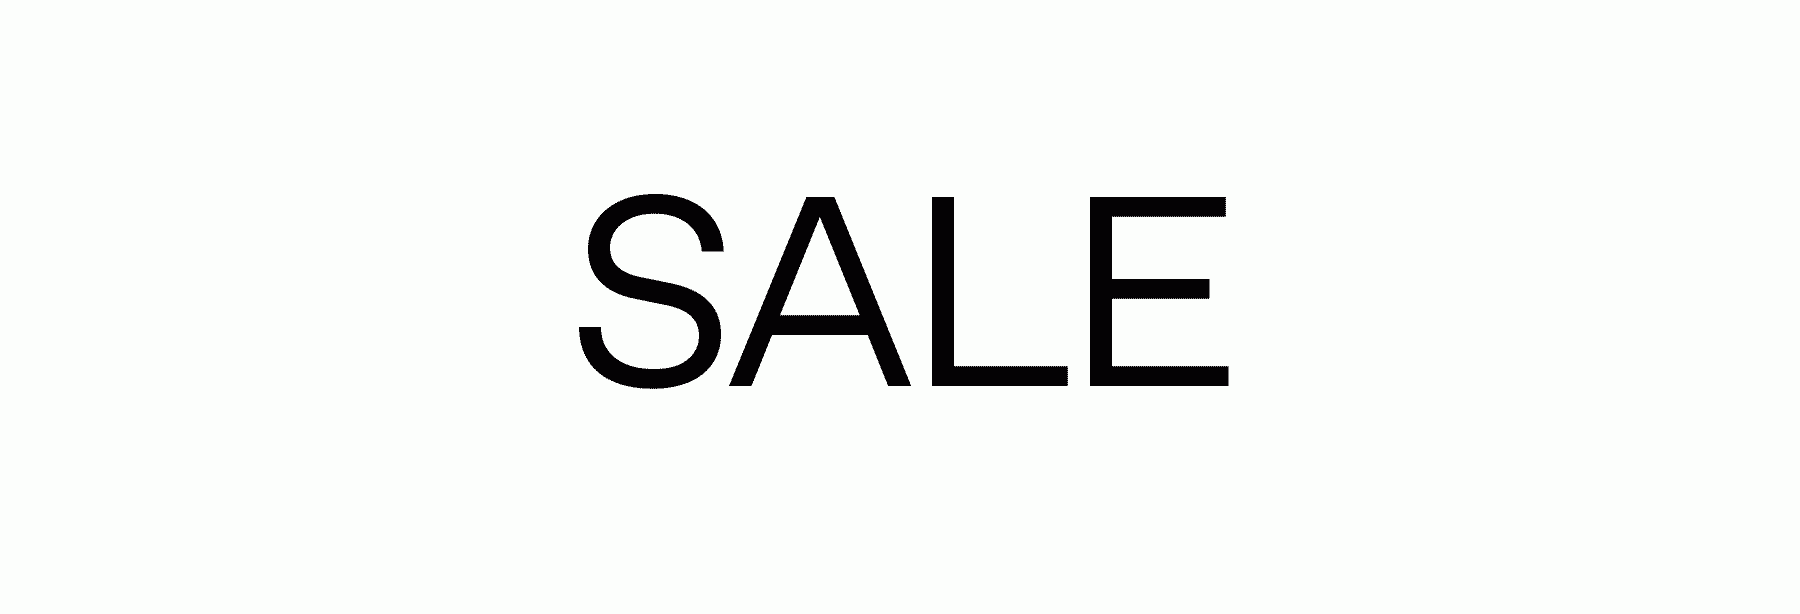 SALE: Up to 60% Off, Further Markdowns